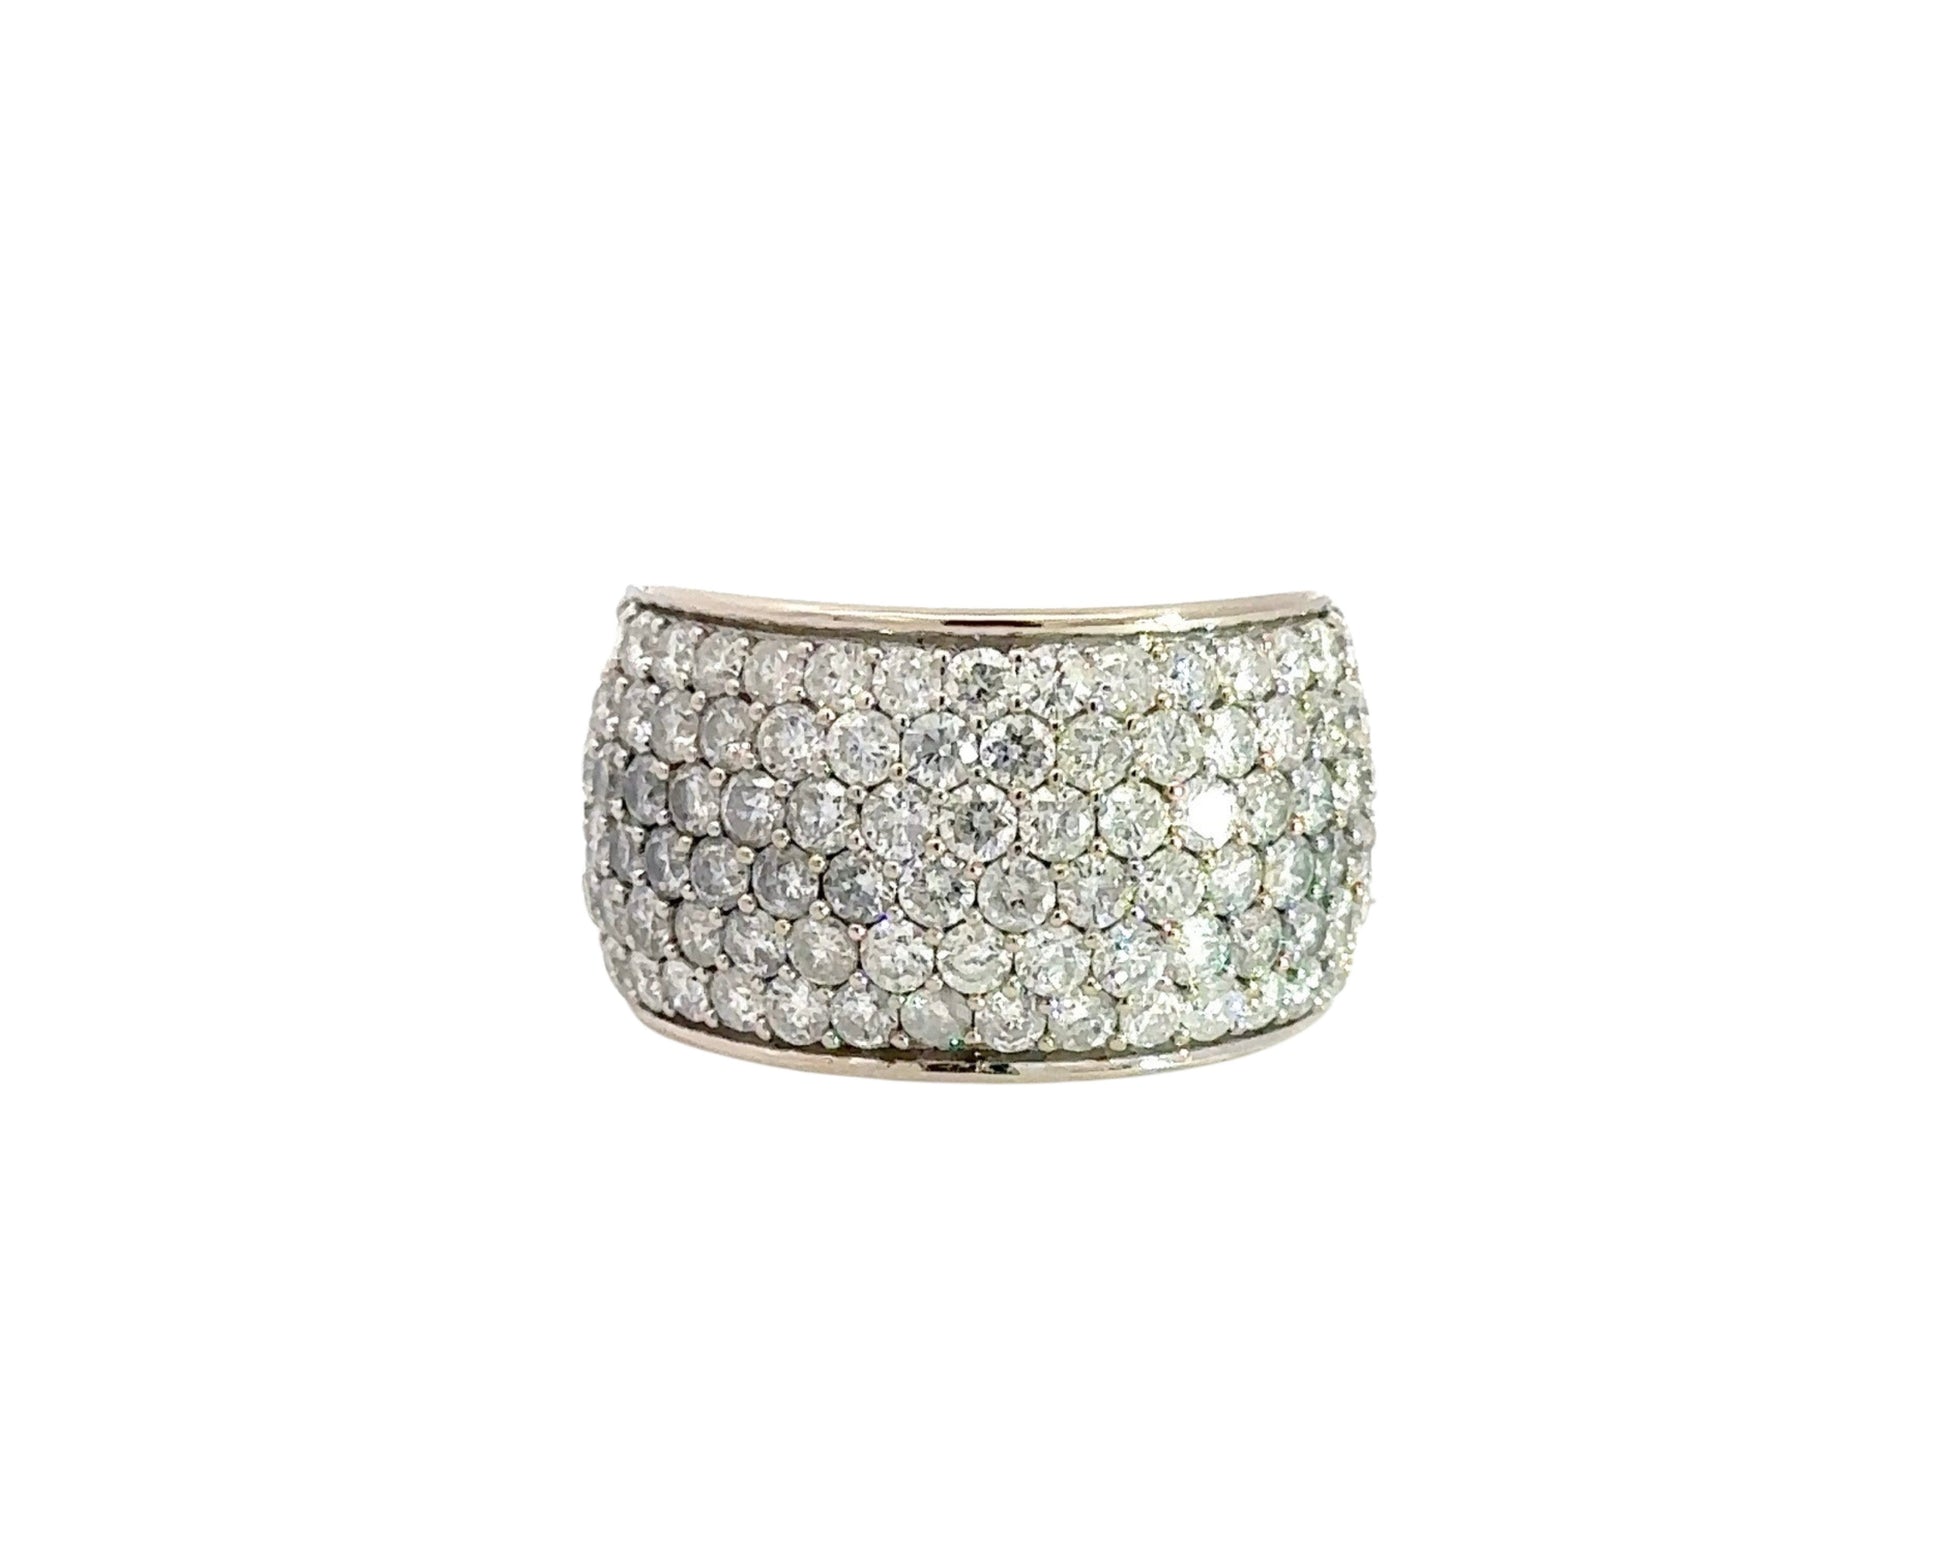 front of white gold diamond band ring with 3 rows of 15 round diamonds and 3 rows of 14 round diamonds on half the band